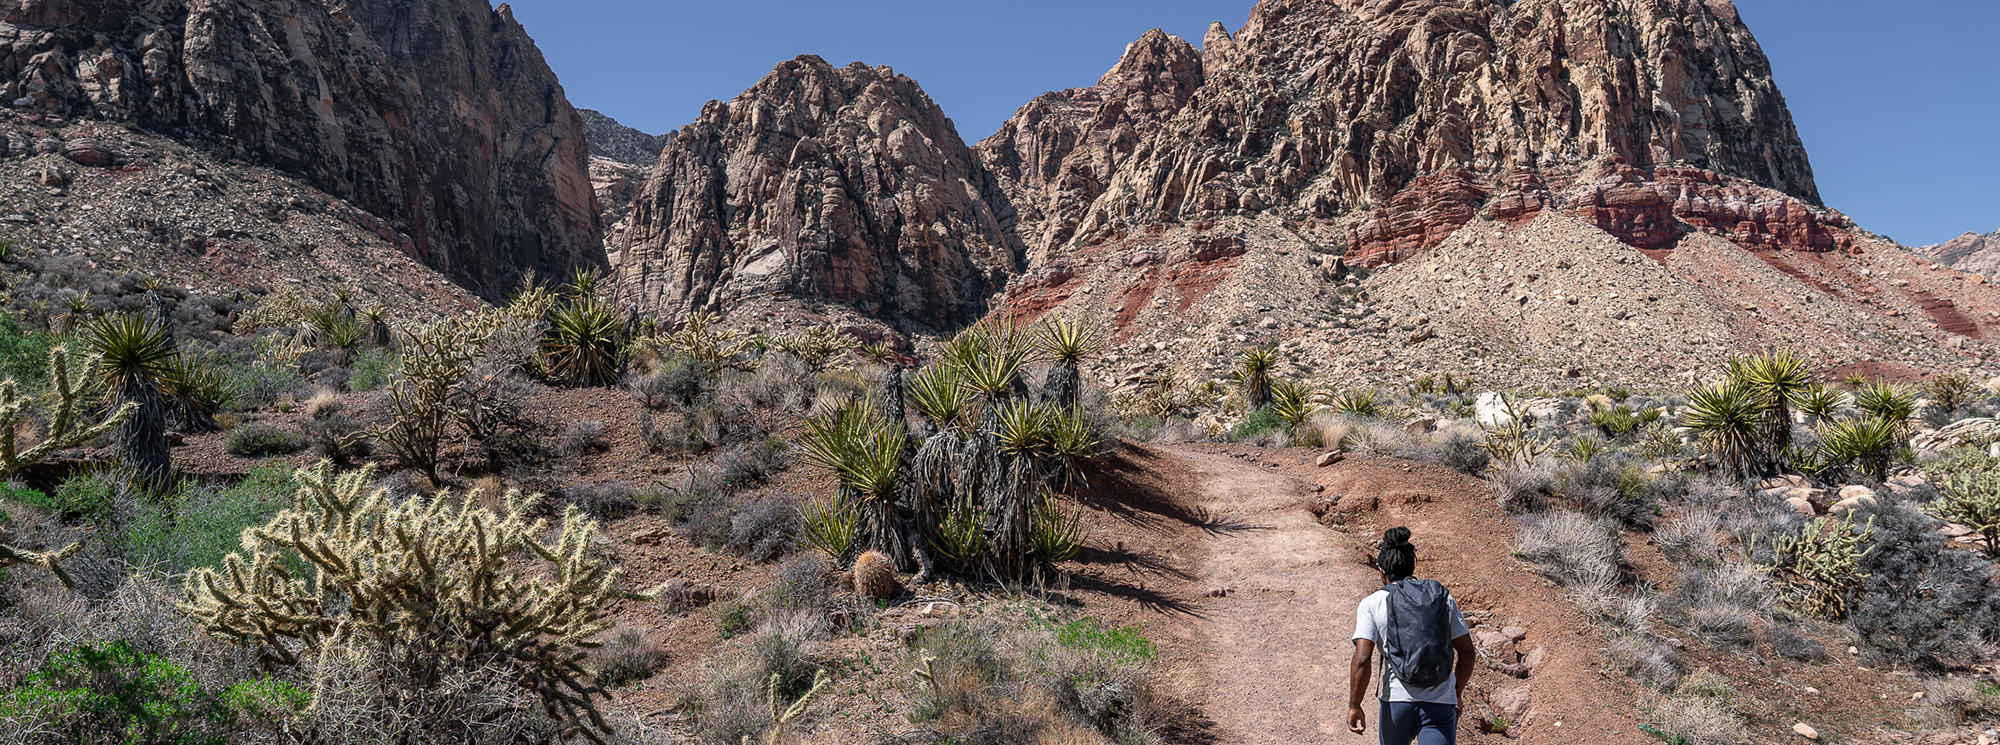 Caleb hiking on his way to a bouldering problem in southeastern Utah.